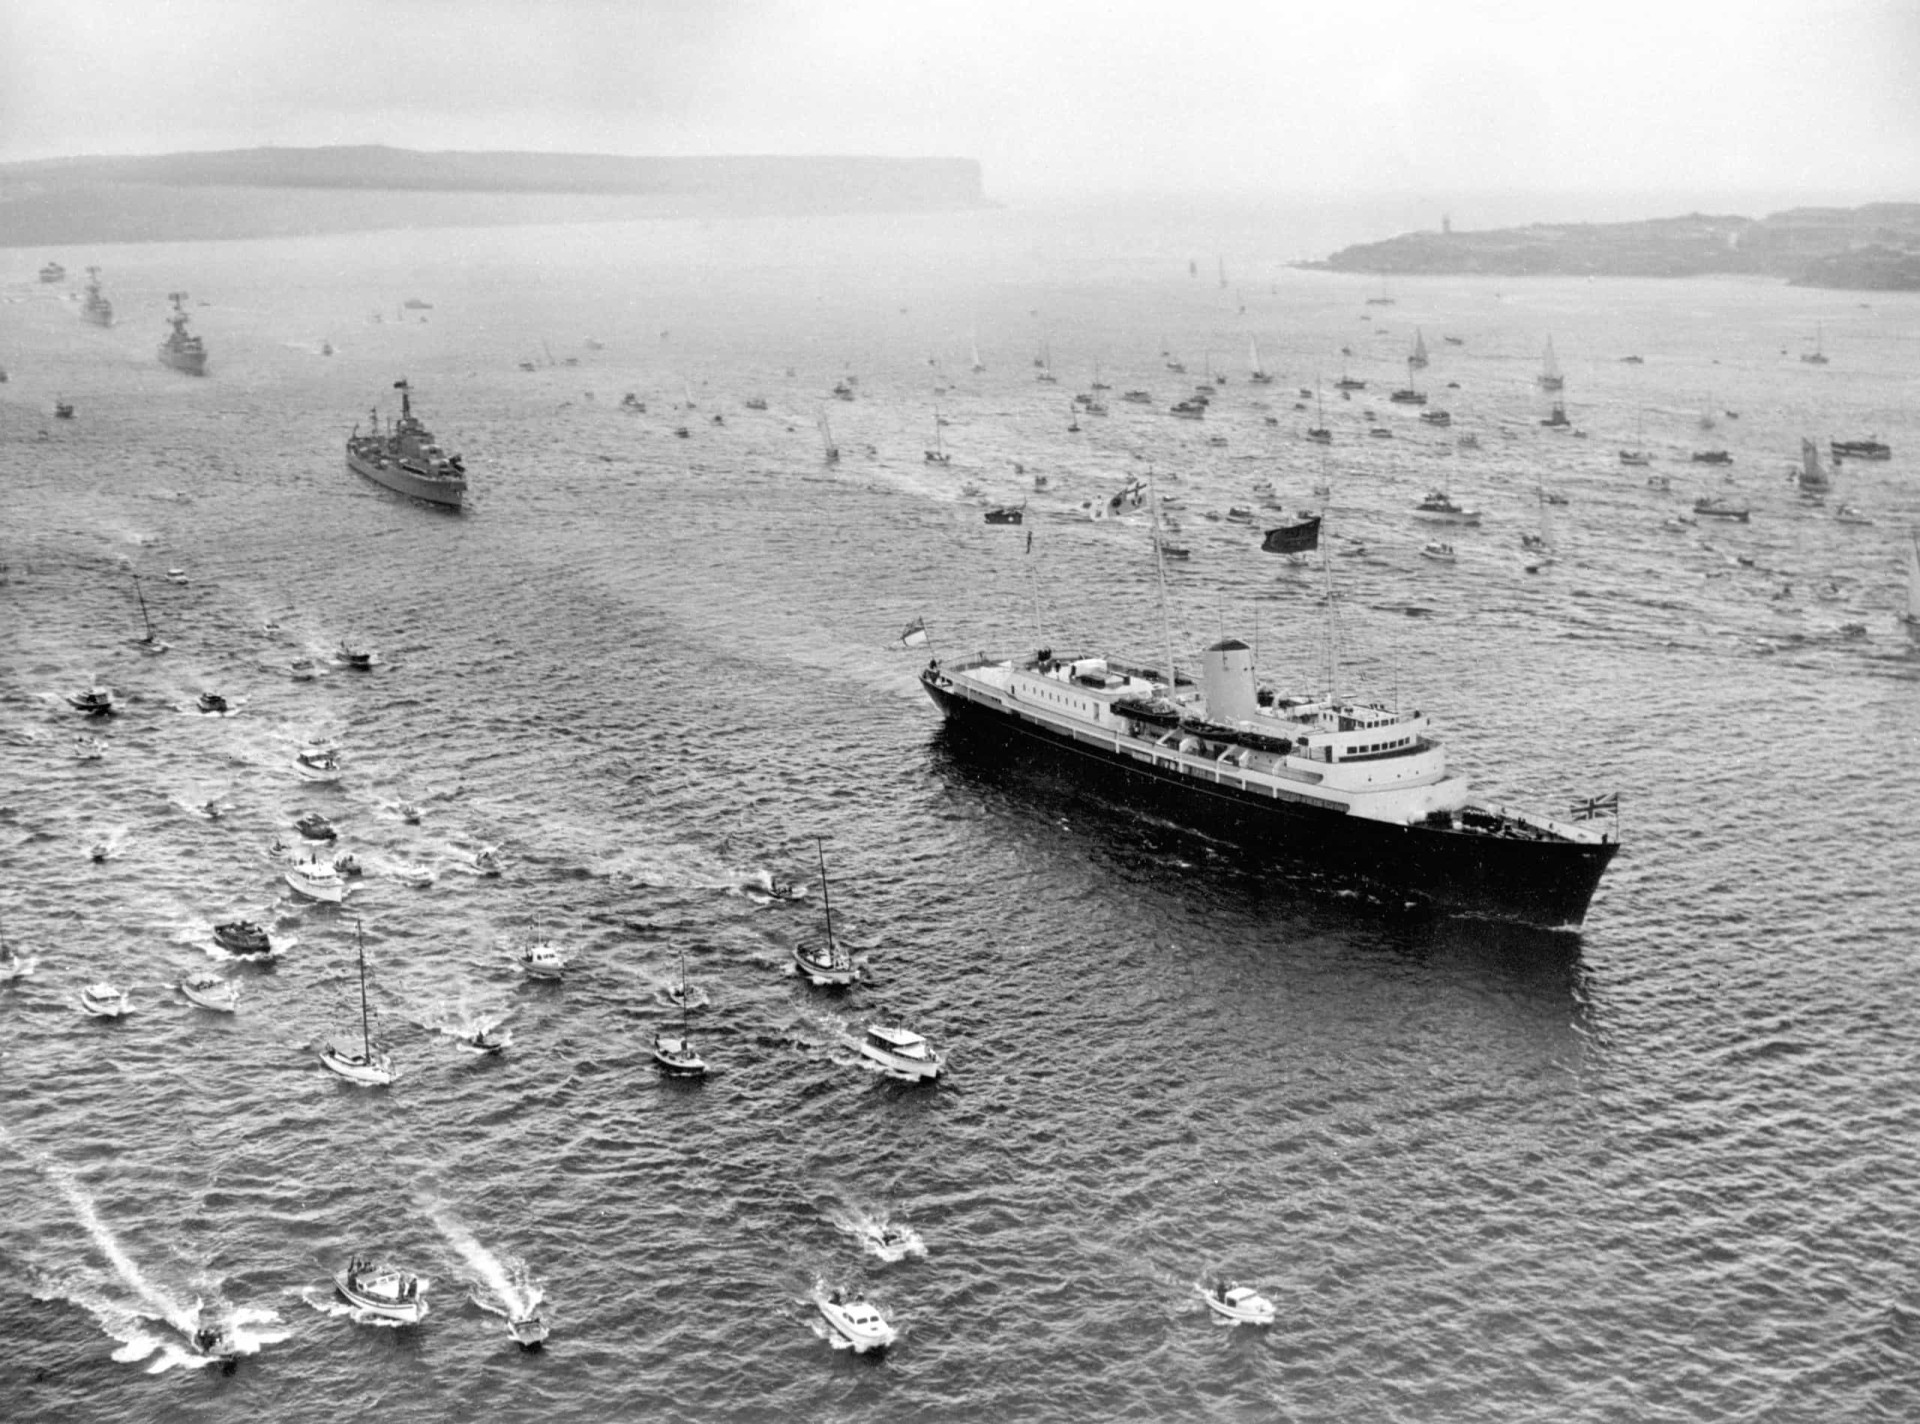 <p>Escorted by an armada of small craft, <em>Britannia</em>, bearing Queen Elizabeth II and the Duke of Edinburgh, arrives off Sydney Heads during their tour of Australia in 1963. Three escorting destroyers of the Royal Australian Navy follow in her wake.</p><p>You may also like:<a href="https://www.starsinsider.com/n/291814?utm_source=msn.com&utm_medium=display&utm_campaign=referral_description&utm_content=474709v3en-us"> Social situations that introverts dread</a></p>